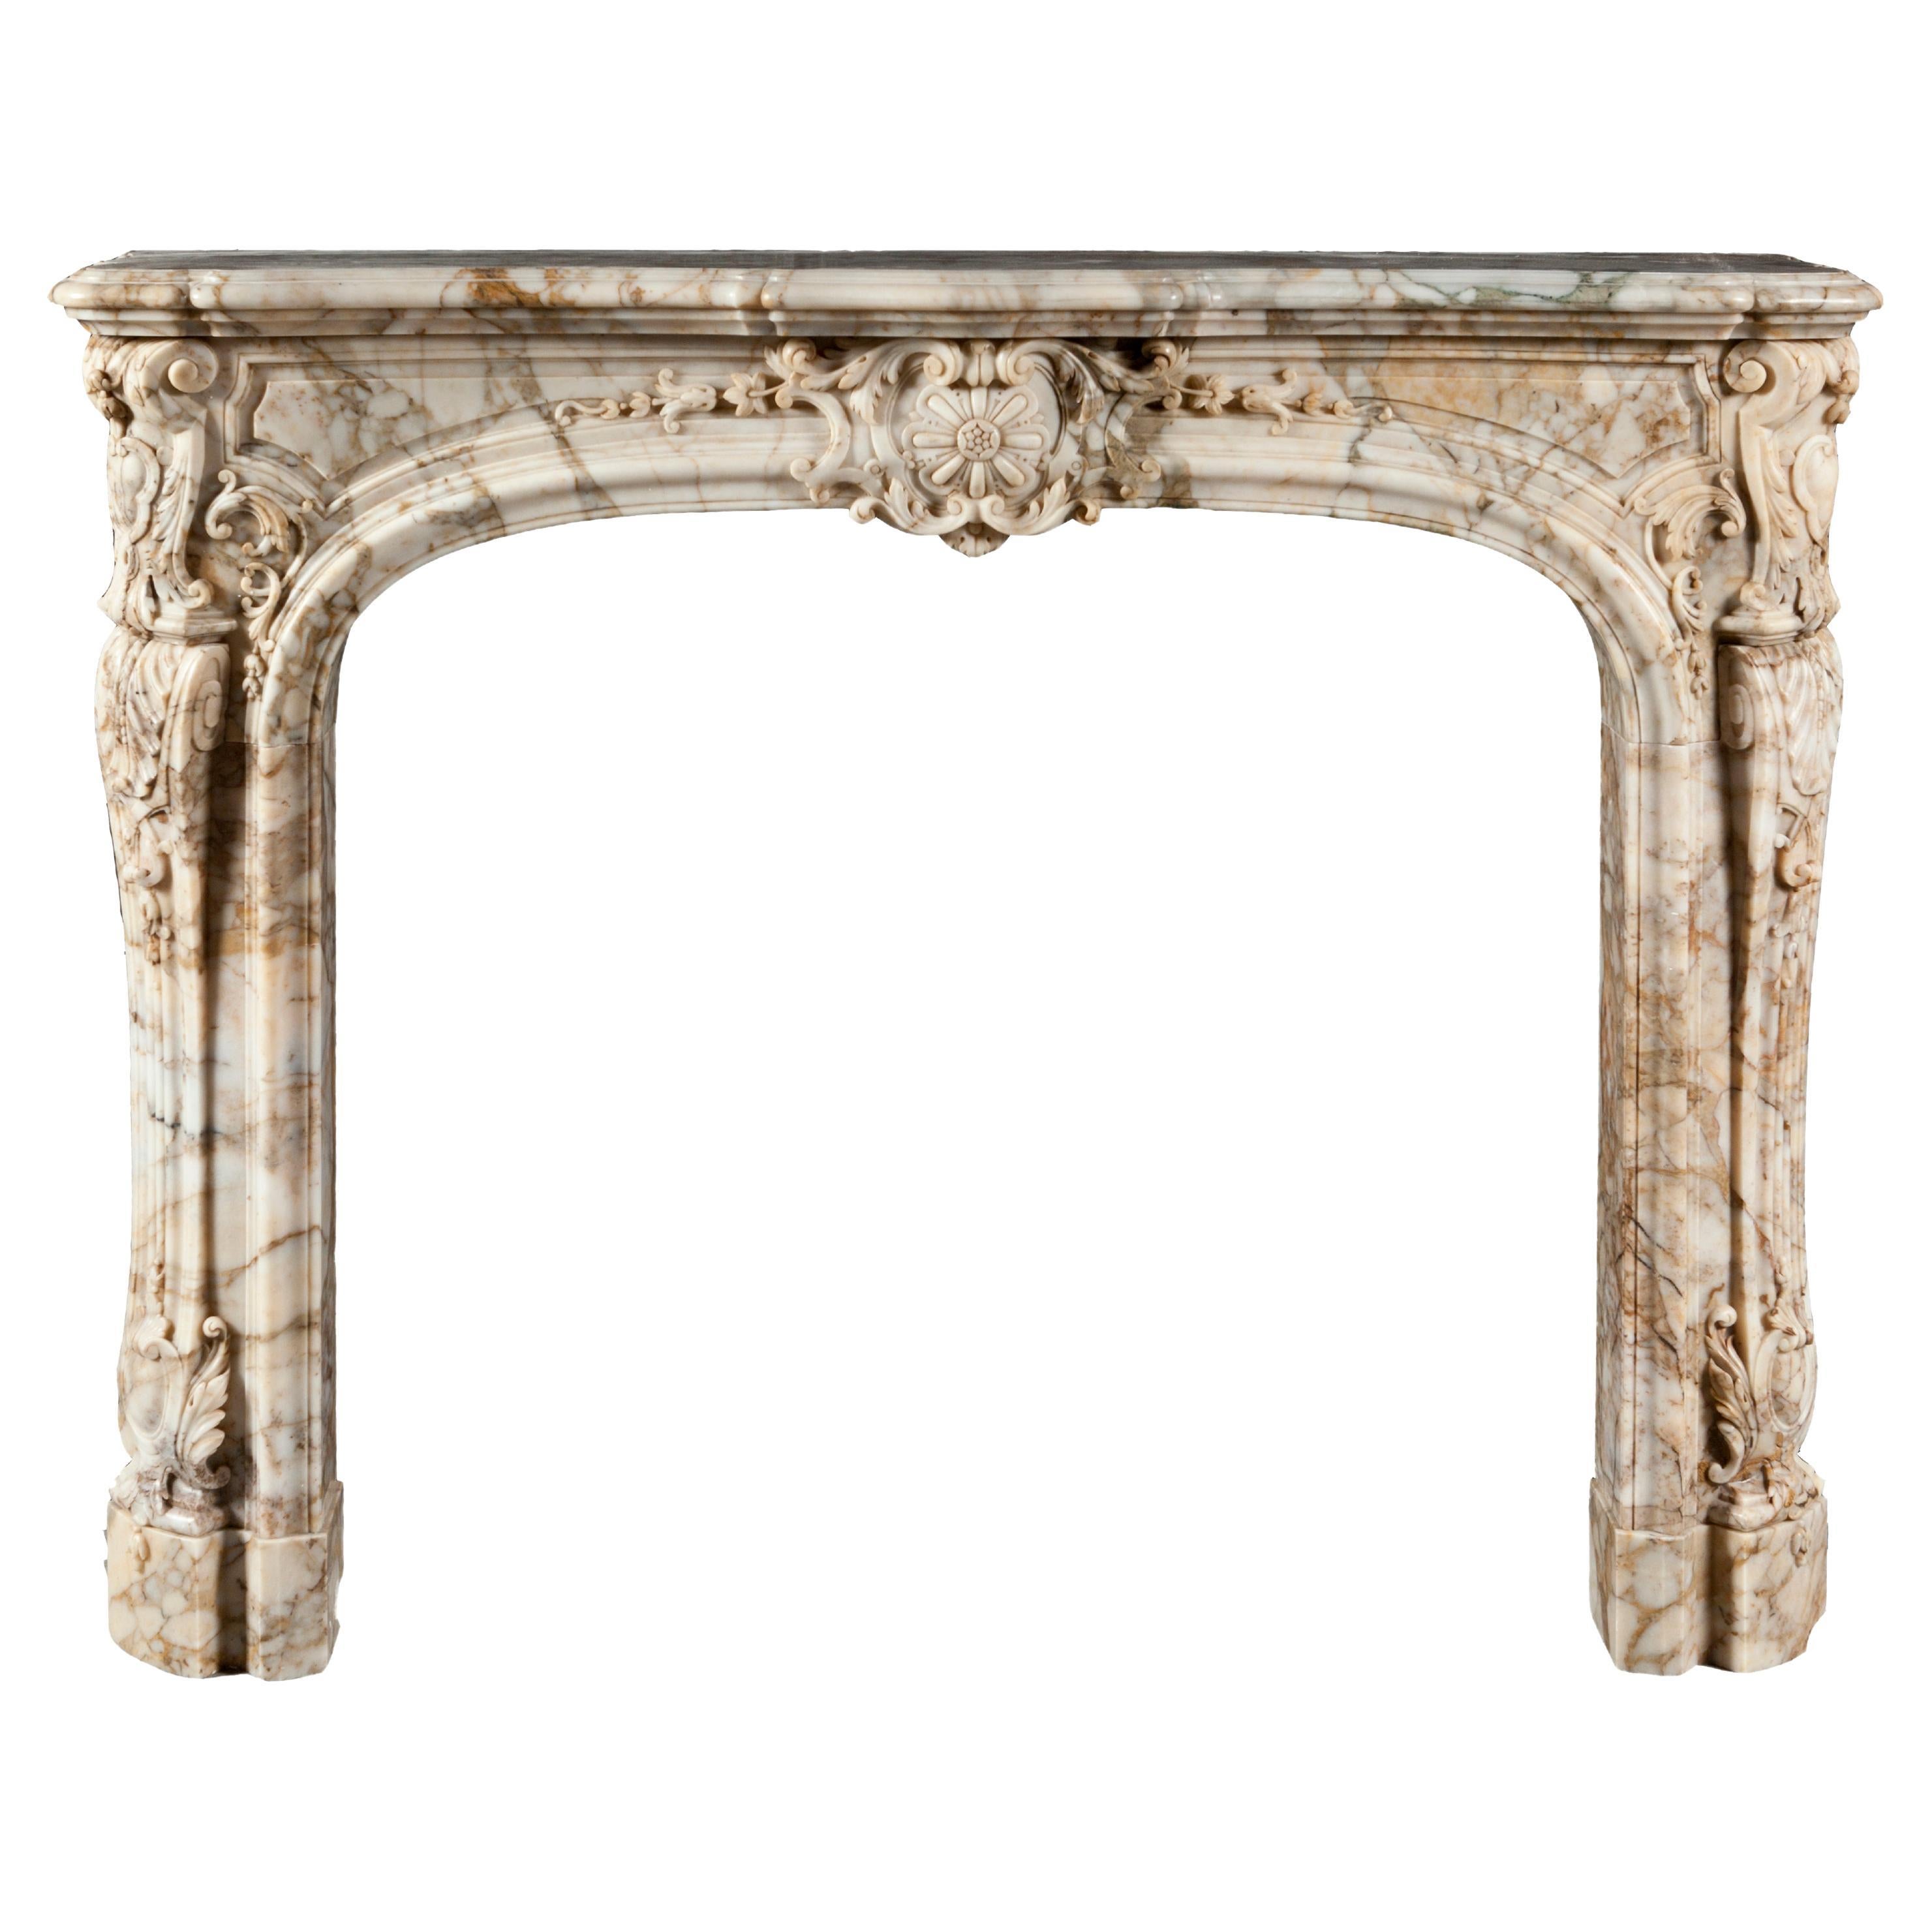 Fine quality French Regency style small marble fireplace